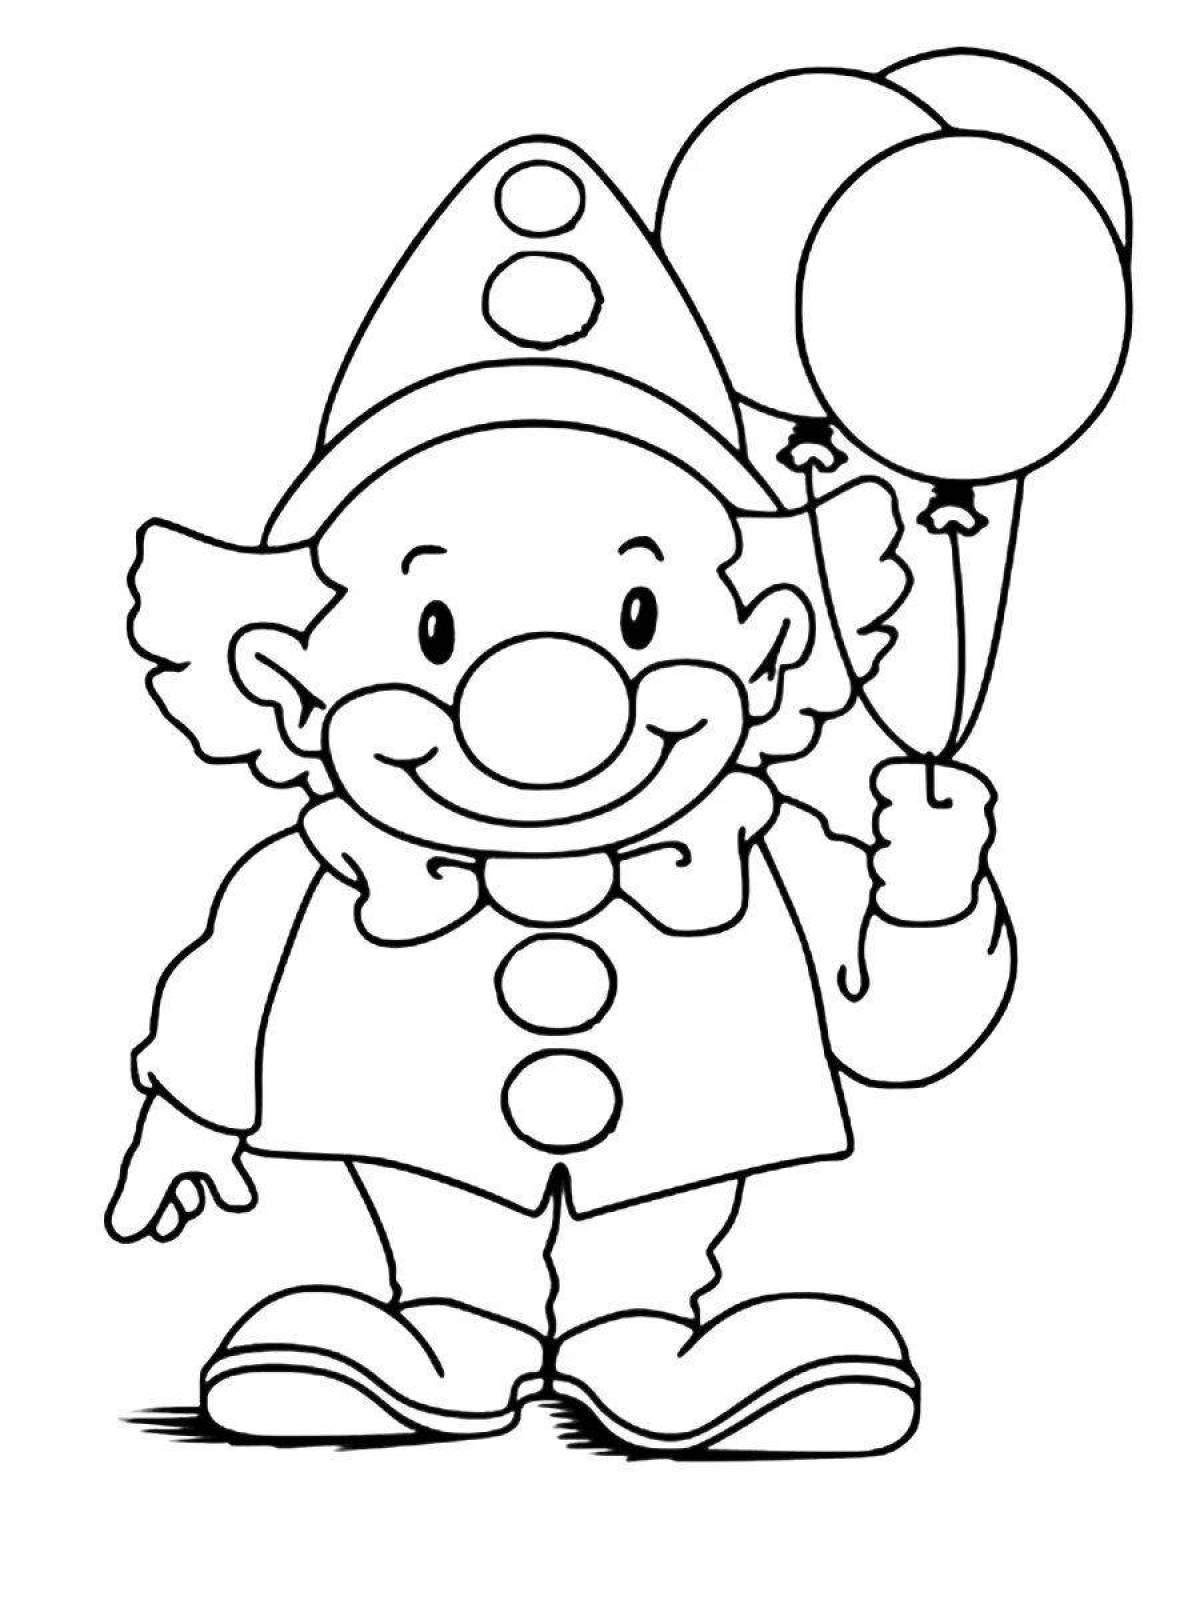 Lightened clown with balloons